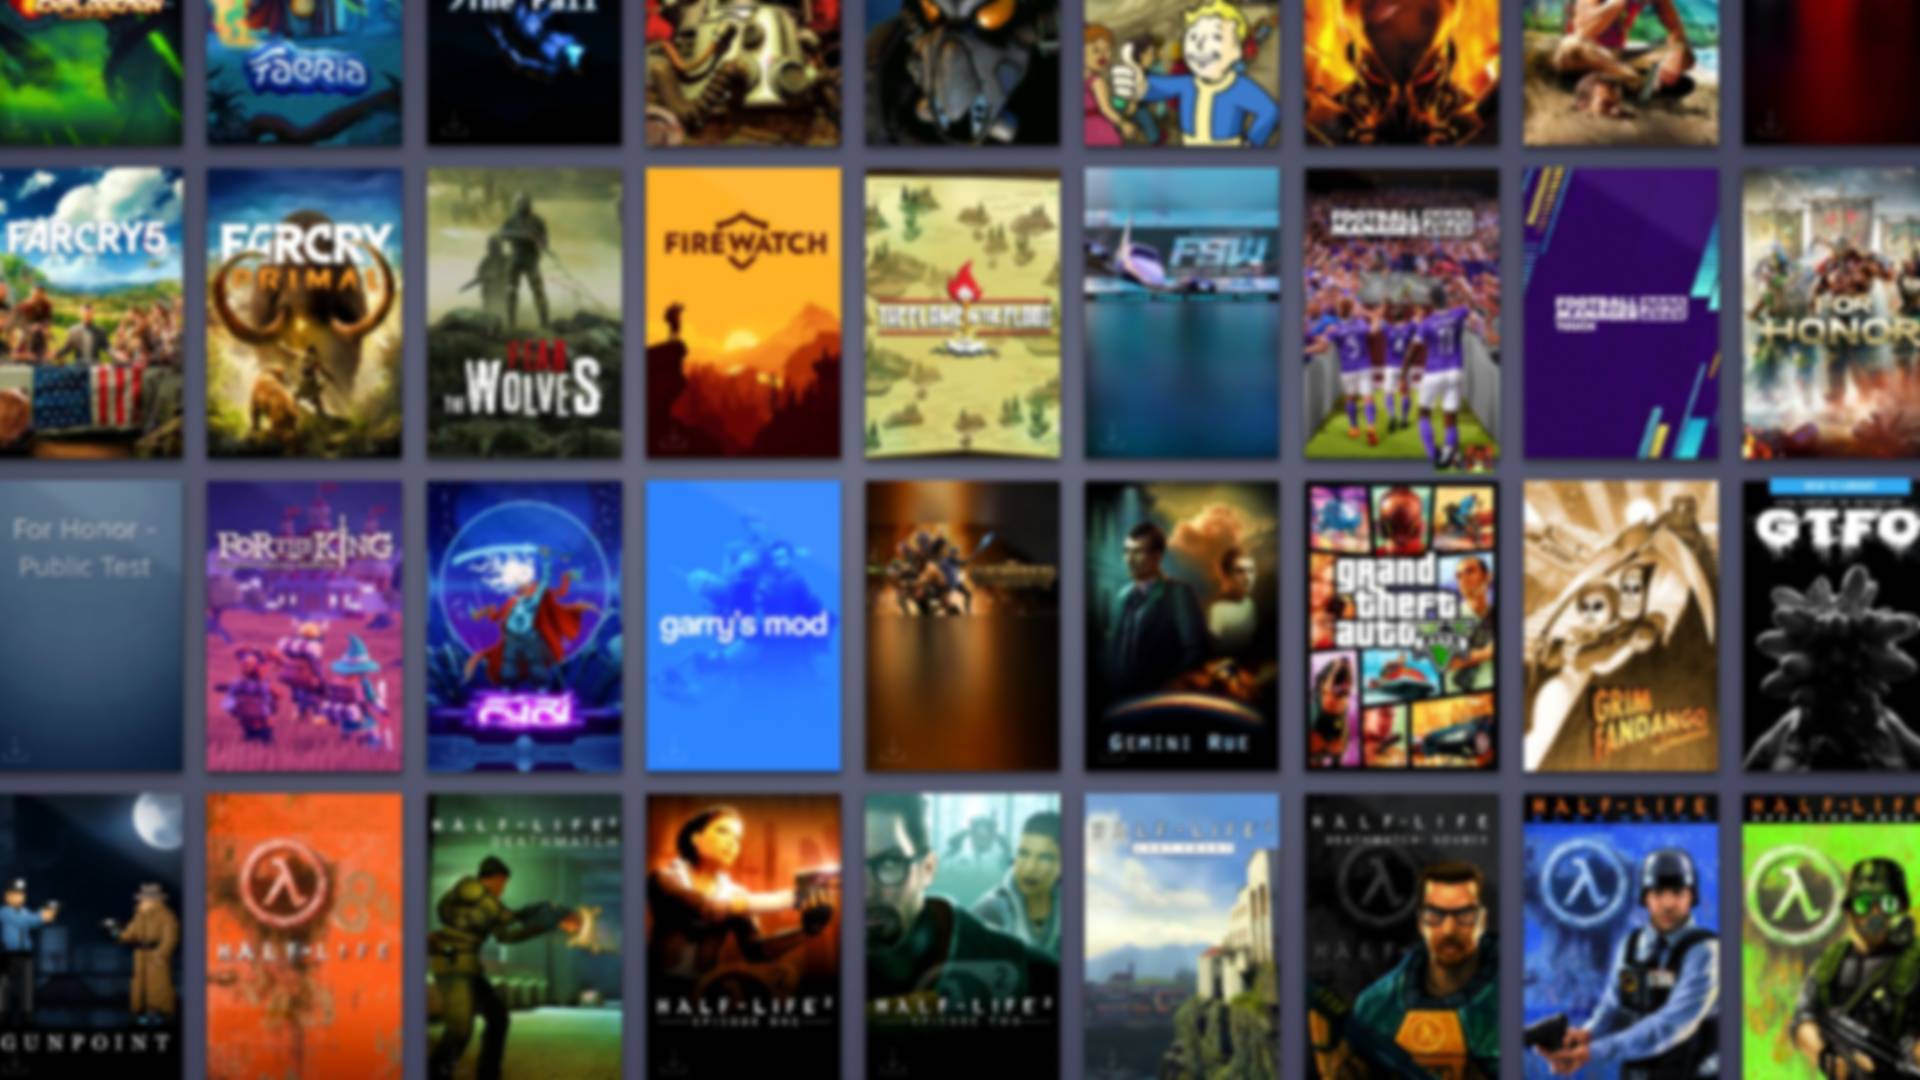 List of free games on steam that add in your library